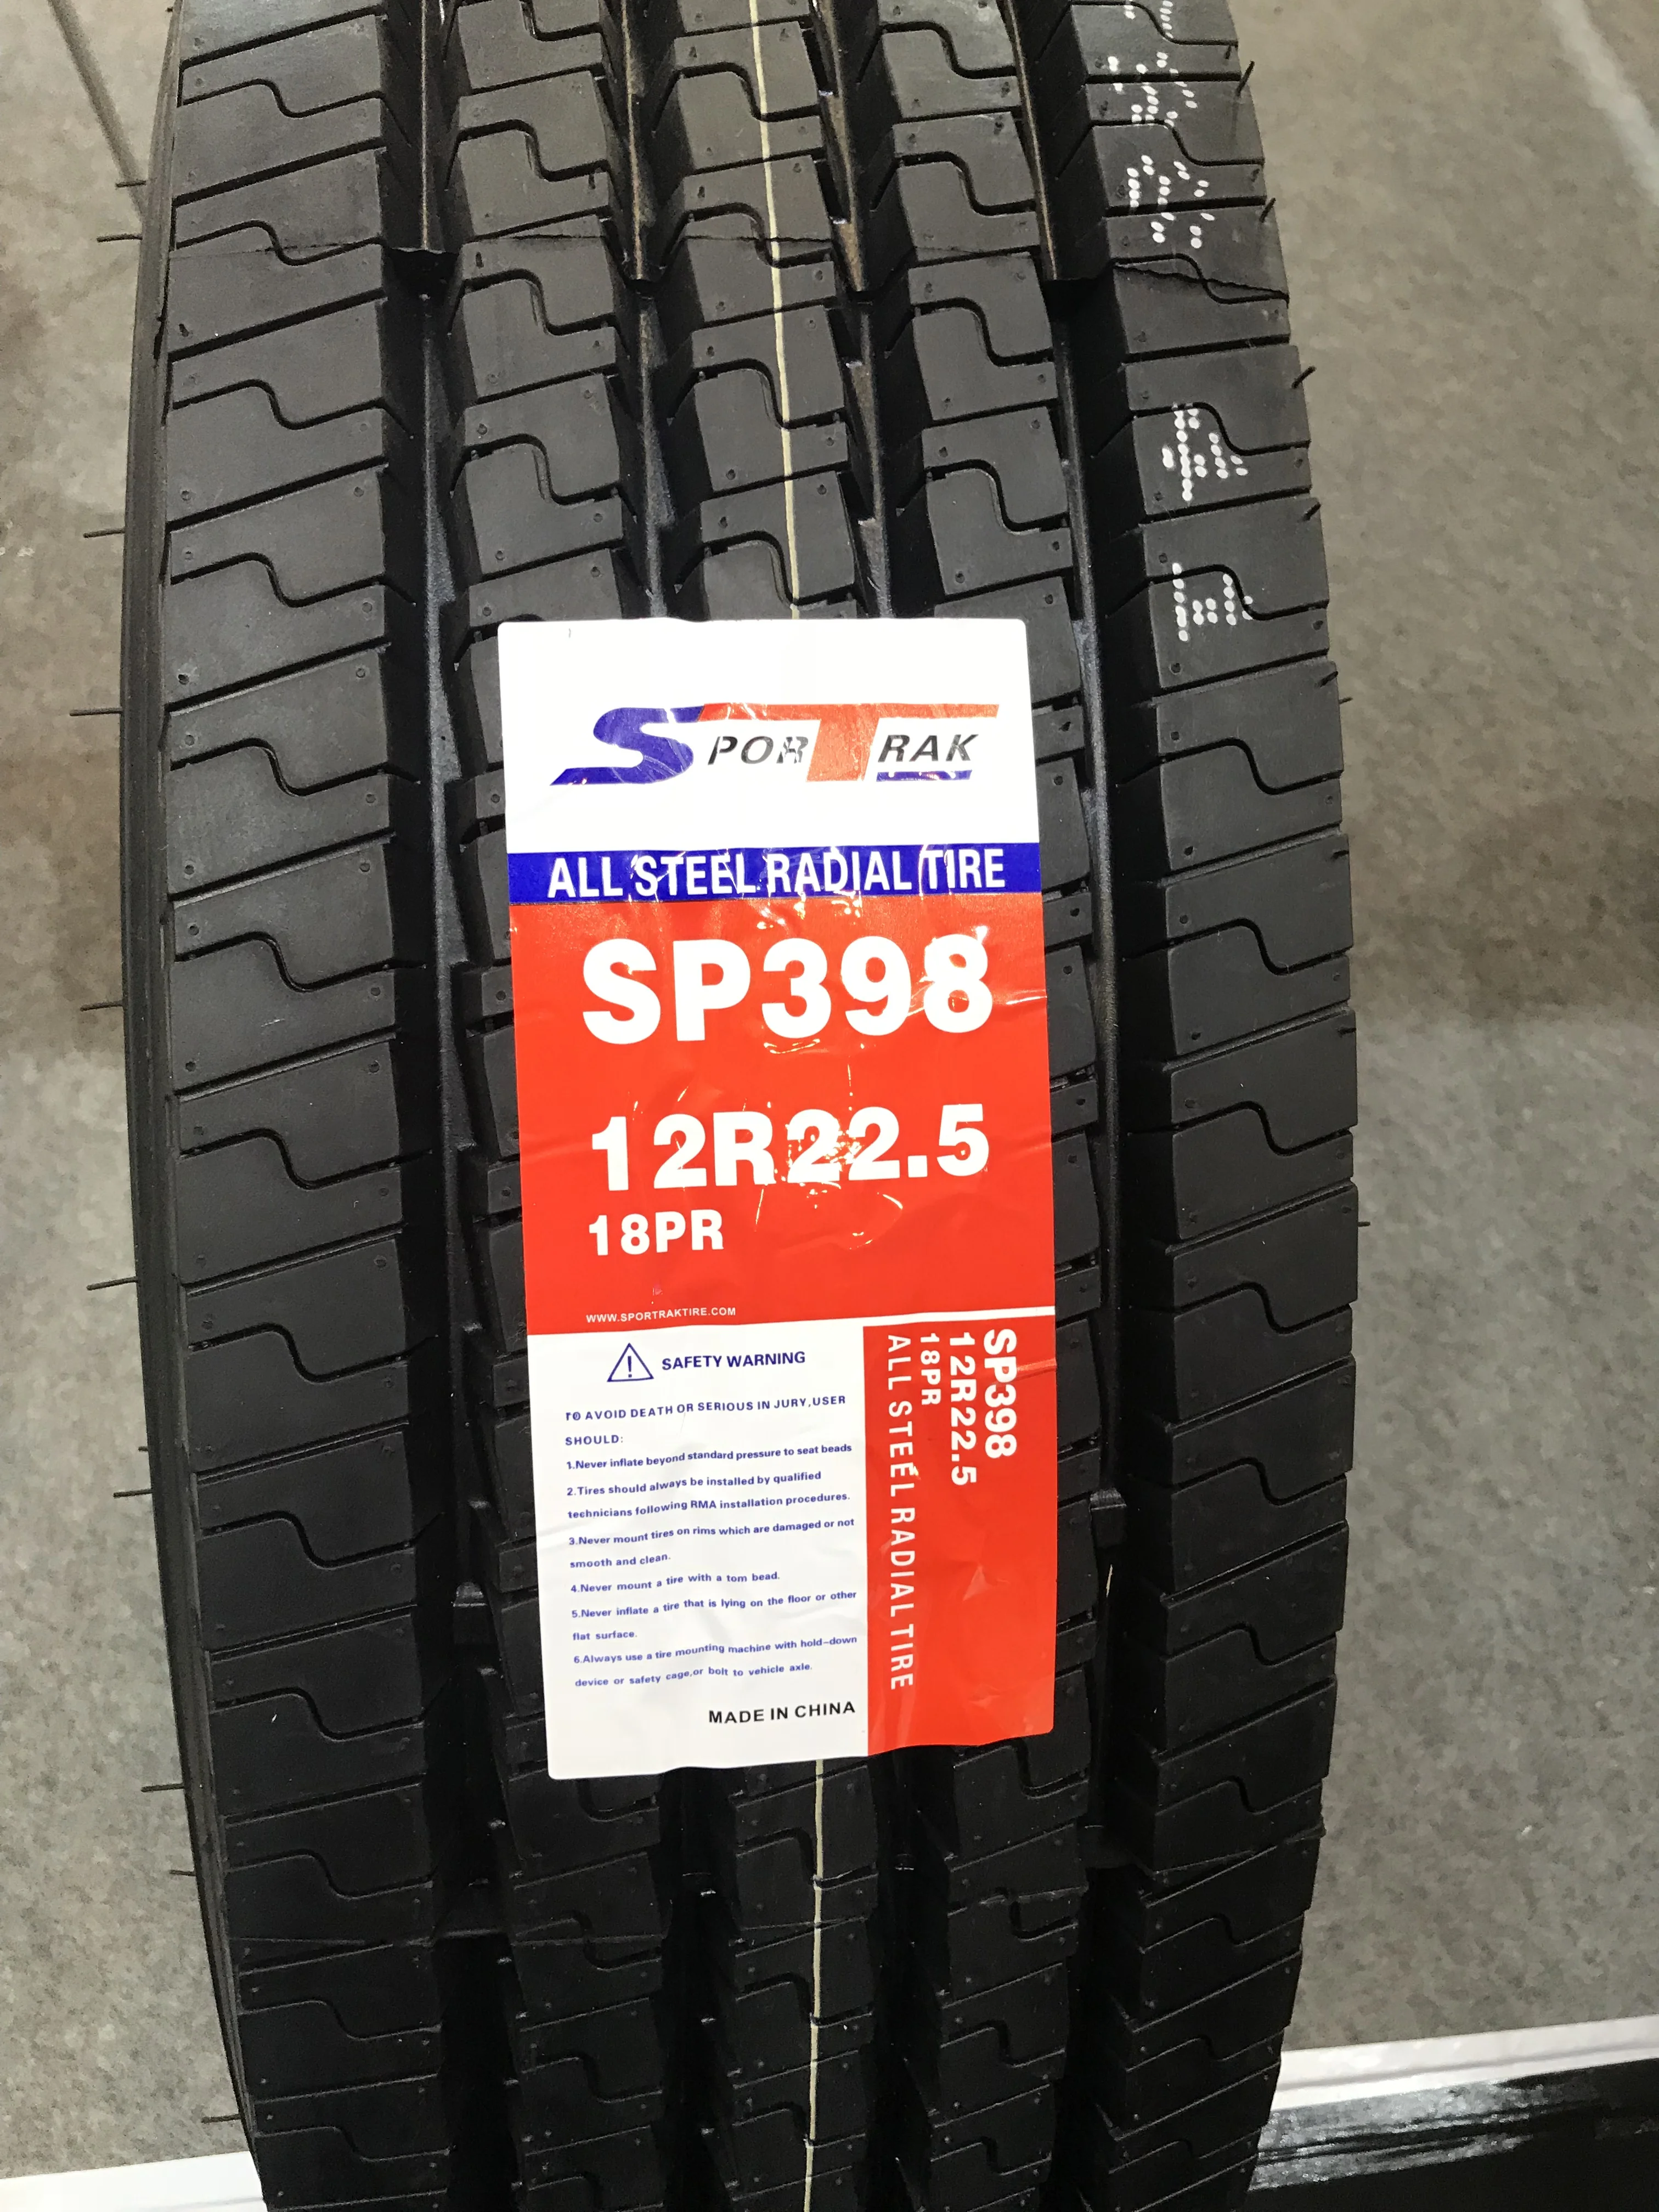 Tubeless radial 295/80R22.5 tyre for Africa market Truck and Bus Trailer tyres 11r22.5 truck tires